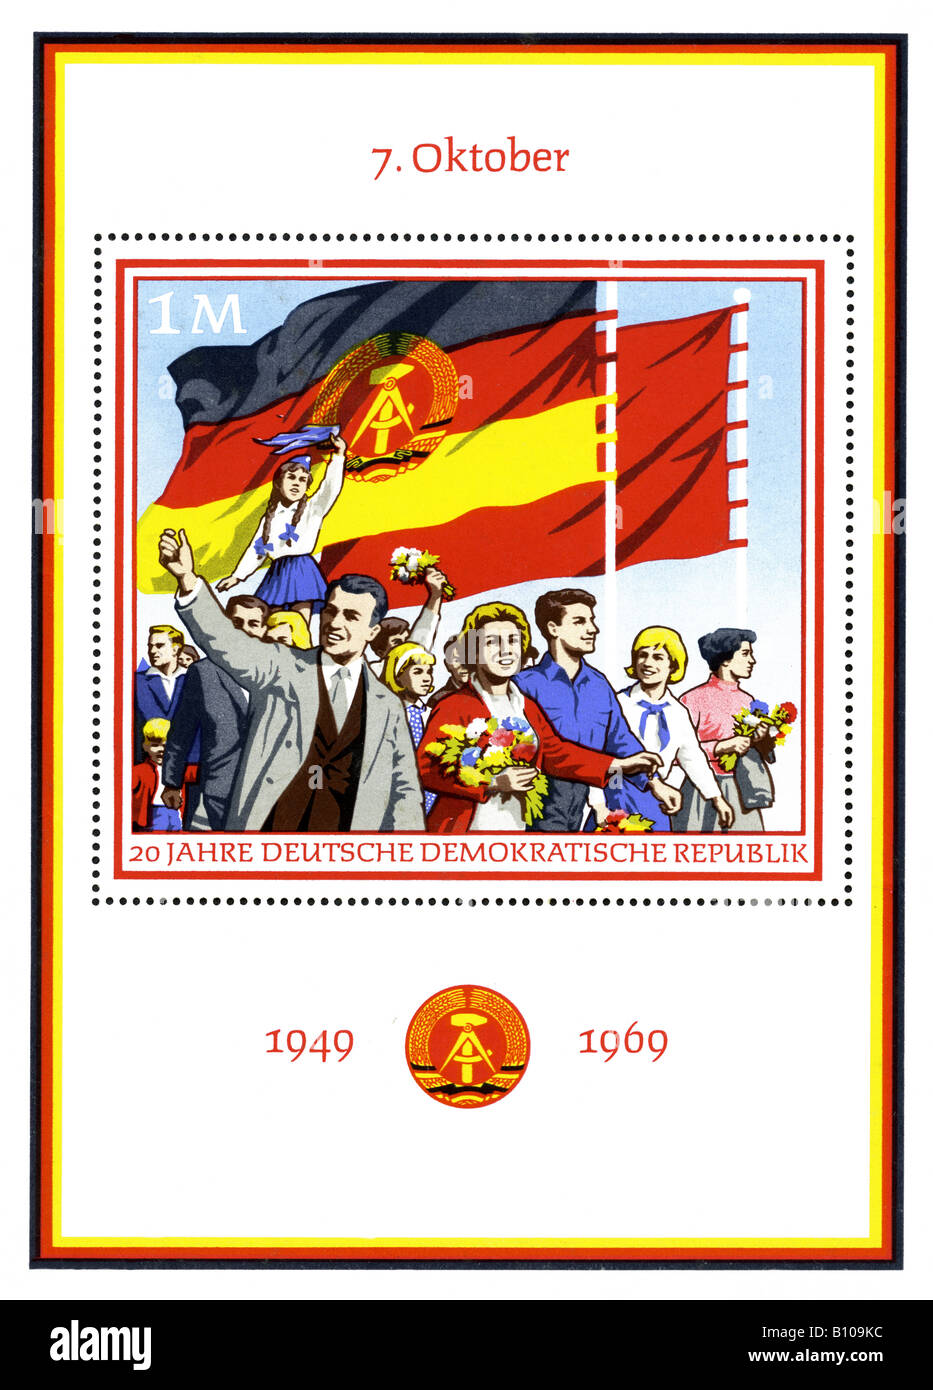 German Democratic Republic postage stamp / miniature sheet commemorating 20 years existence from 1949 - 1969. Stock Photo